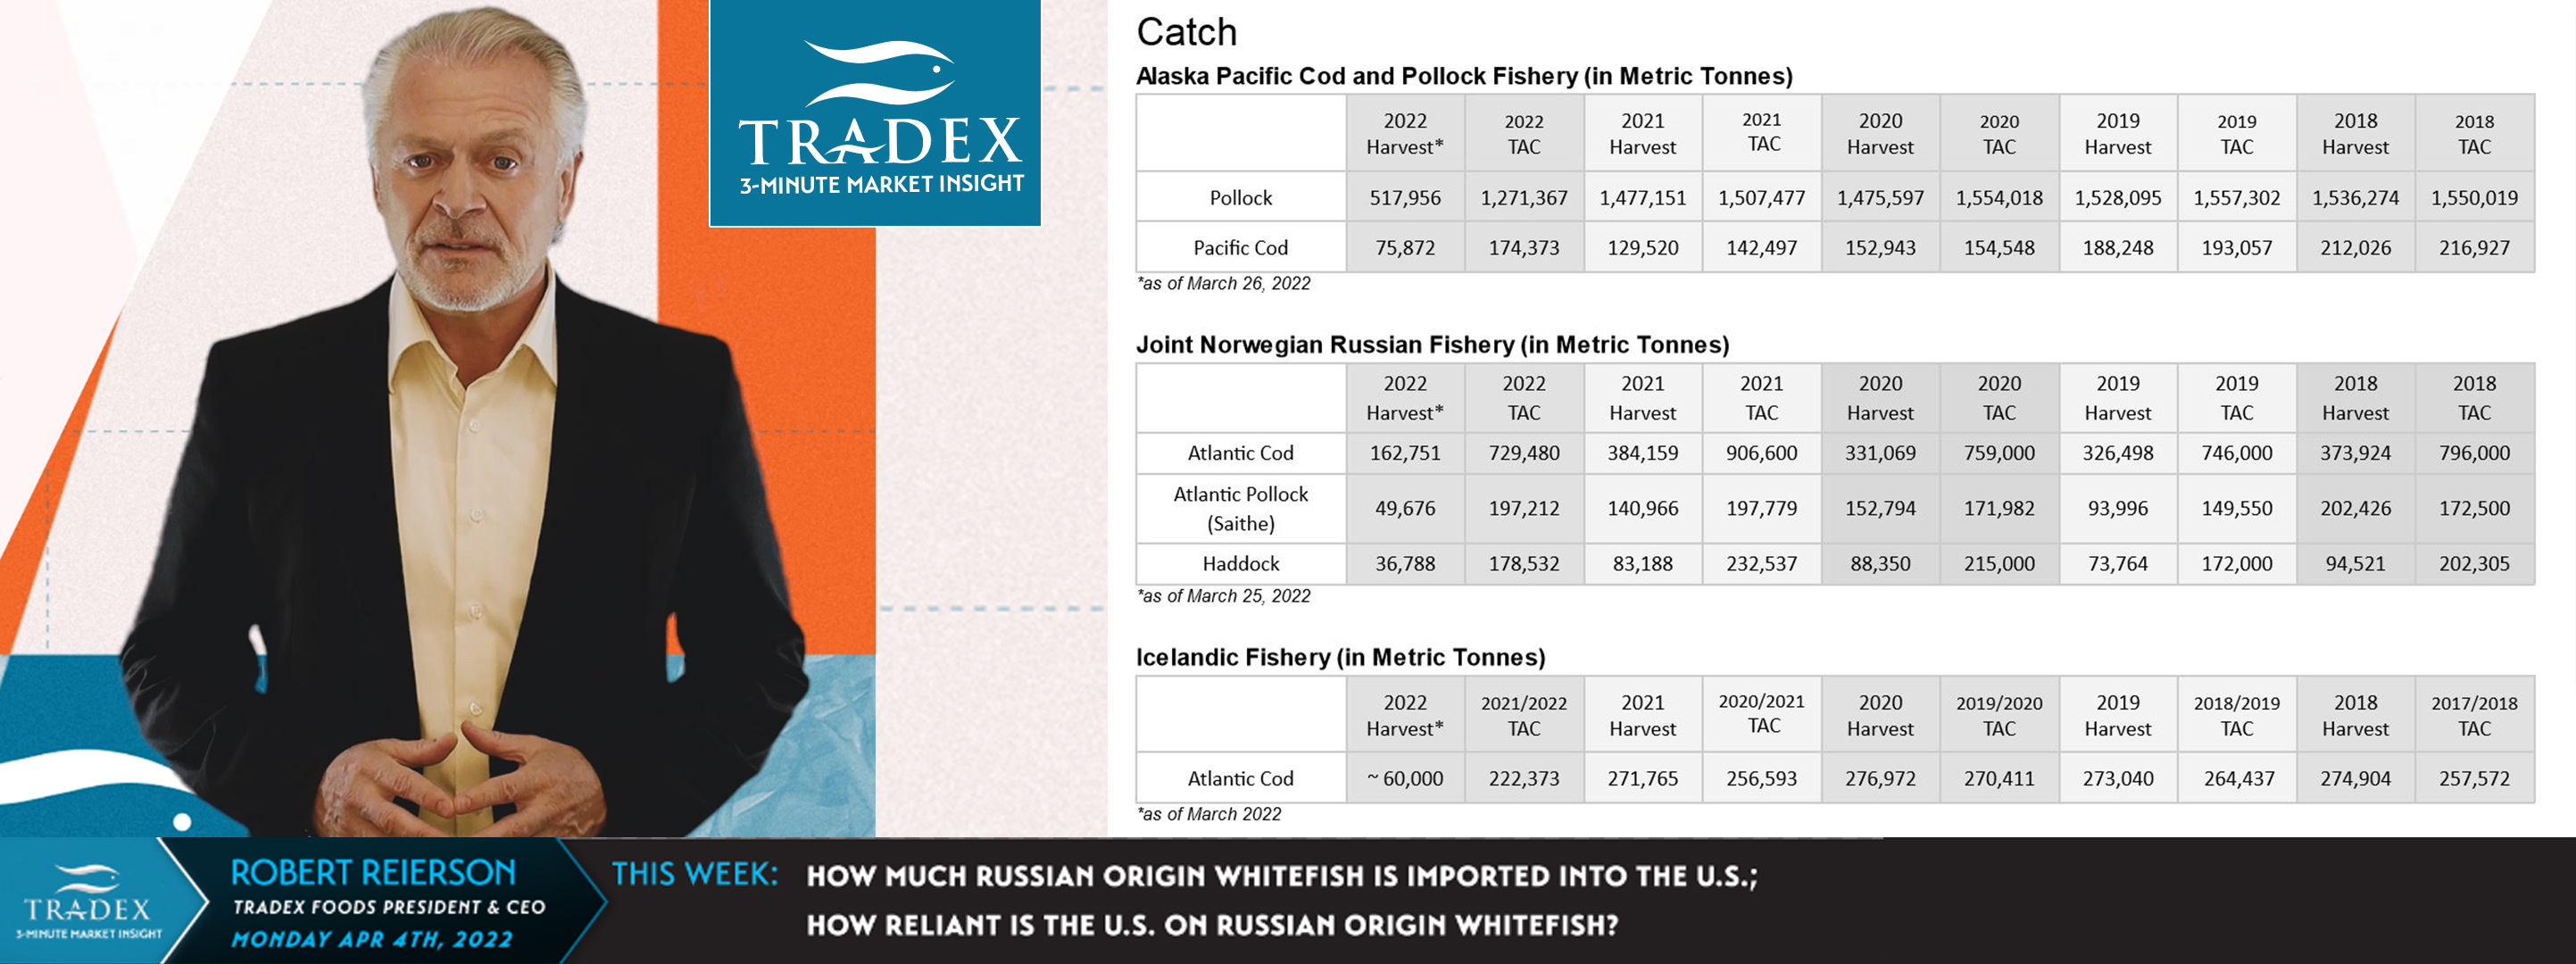 RUSSIAN WHITEFISH IMPORTS